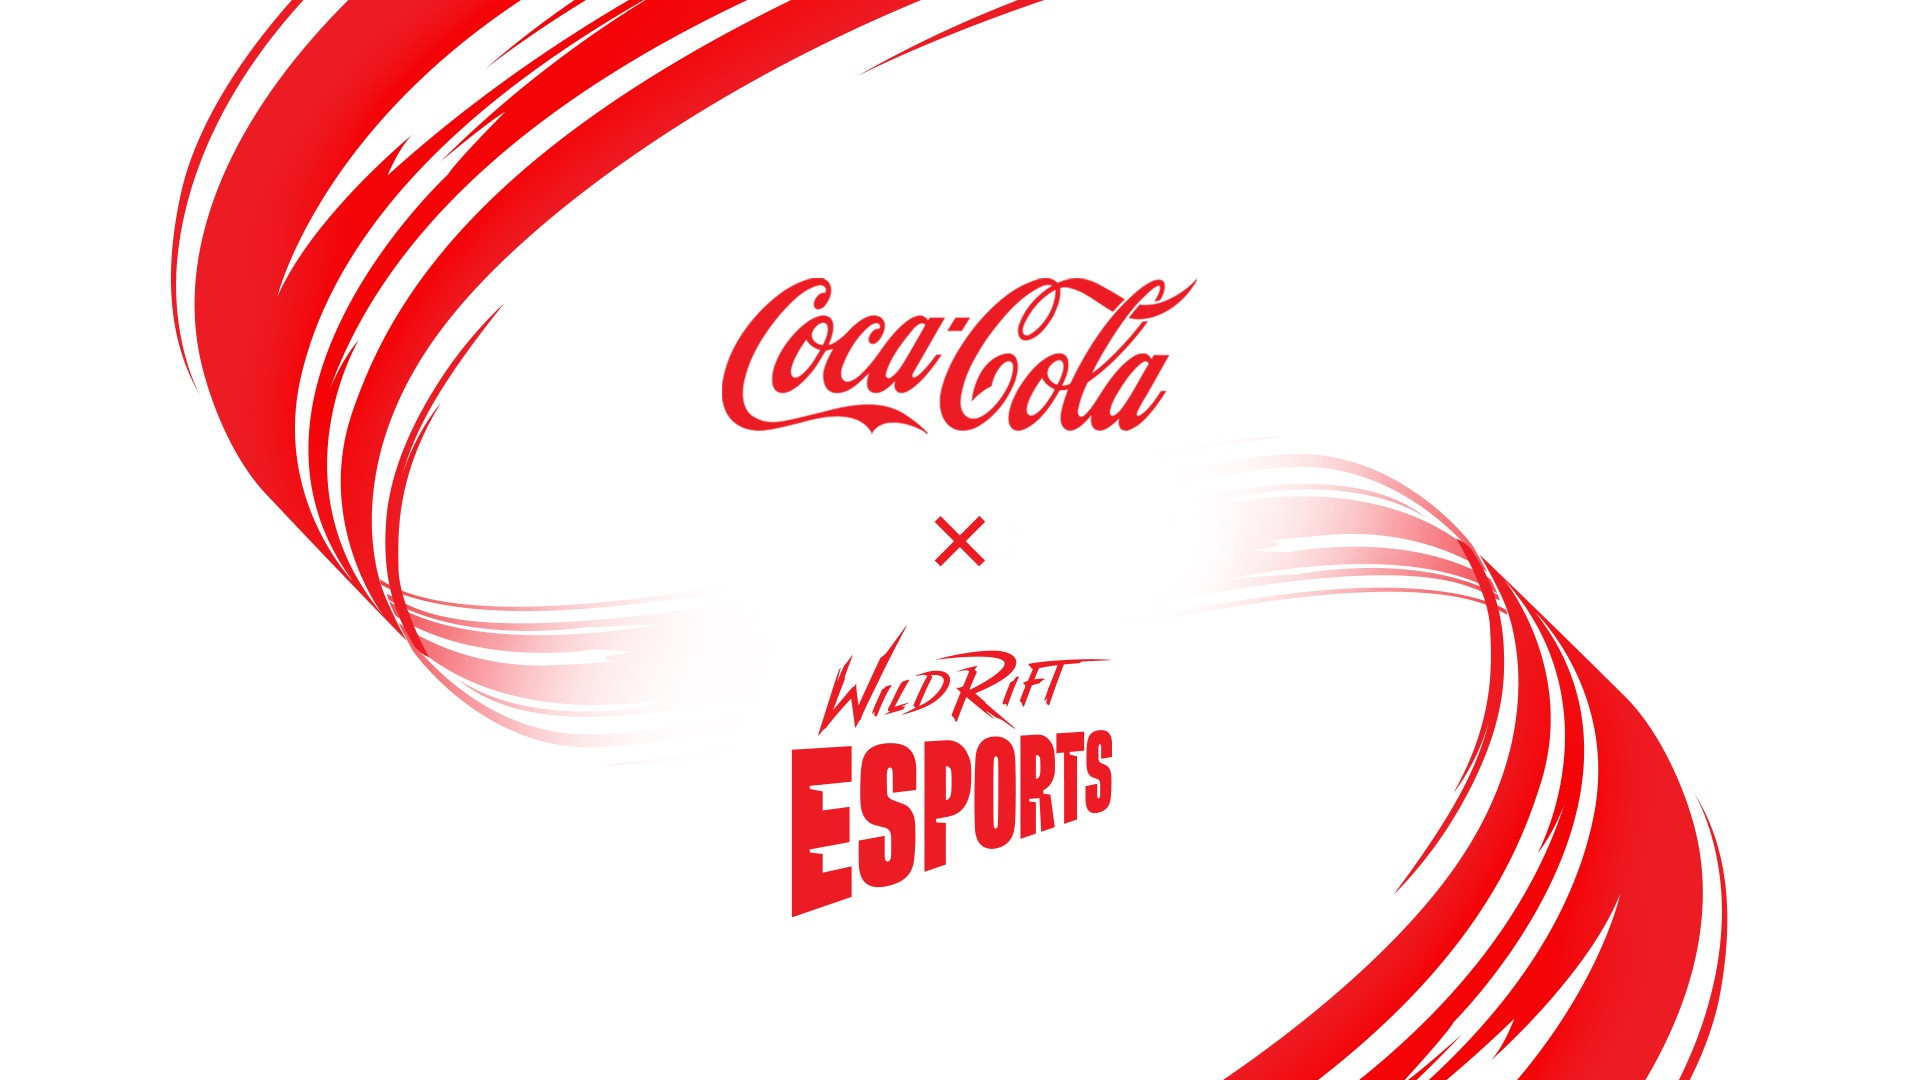 Coca-Cola have teamed with Riot Games, who oversee Wild Rift Esports ©Wild Rift Esports